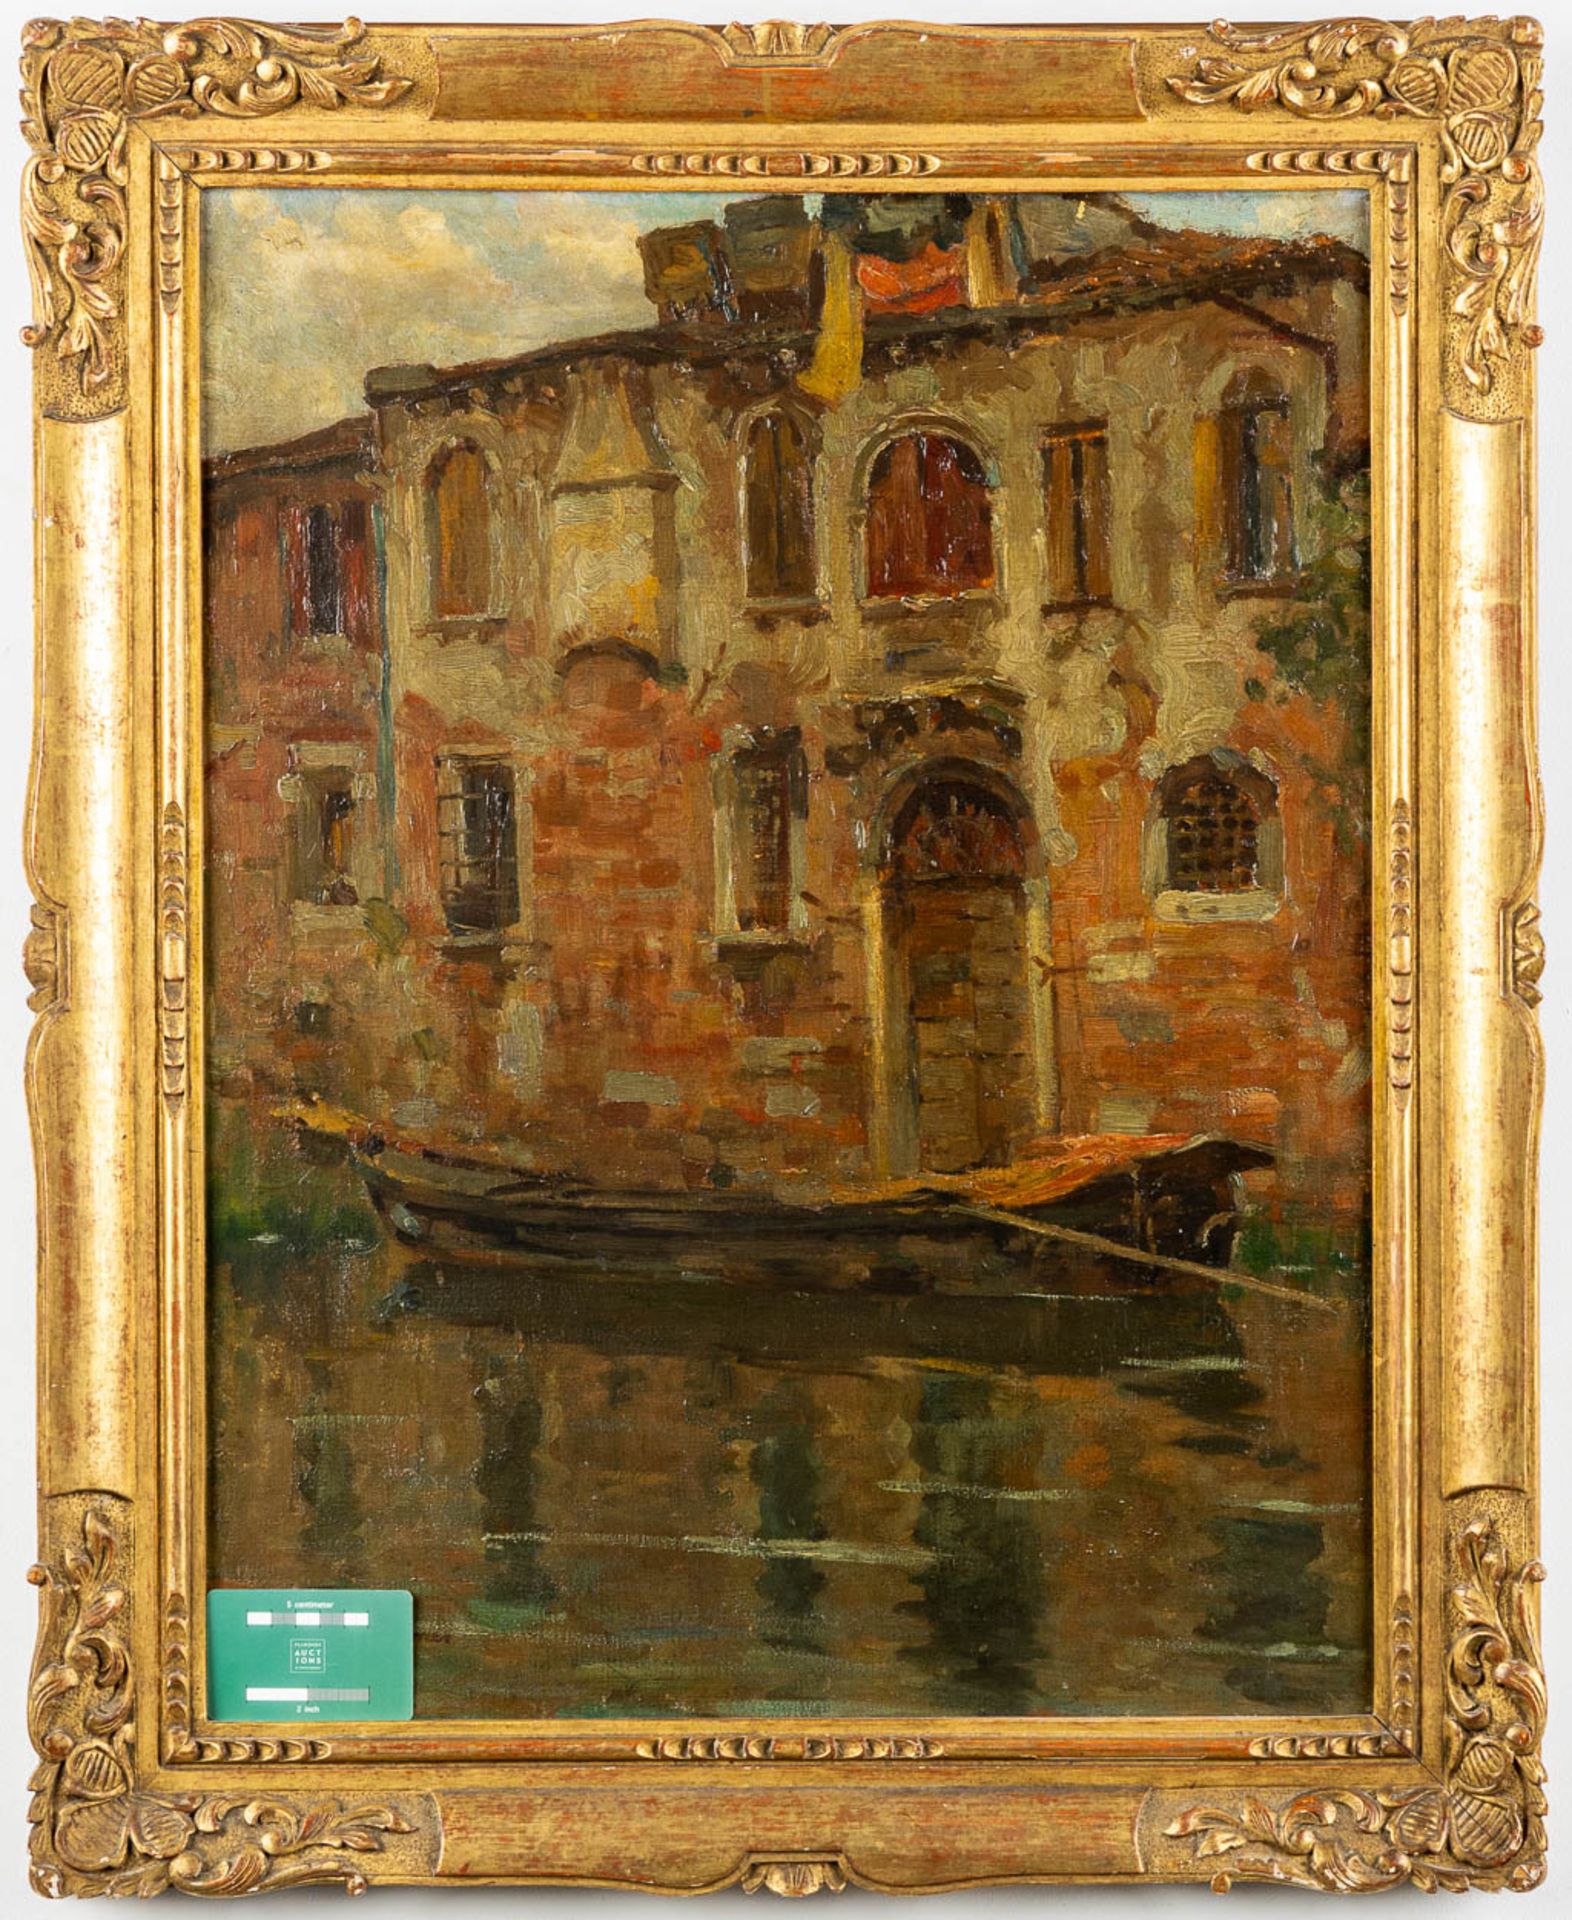 Isidore OPSOMER (1878-1967) 'Ship in the canal' oil on canvas. (W:50 x H:65 cm) - Image 2 of 6